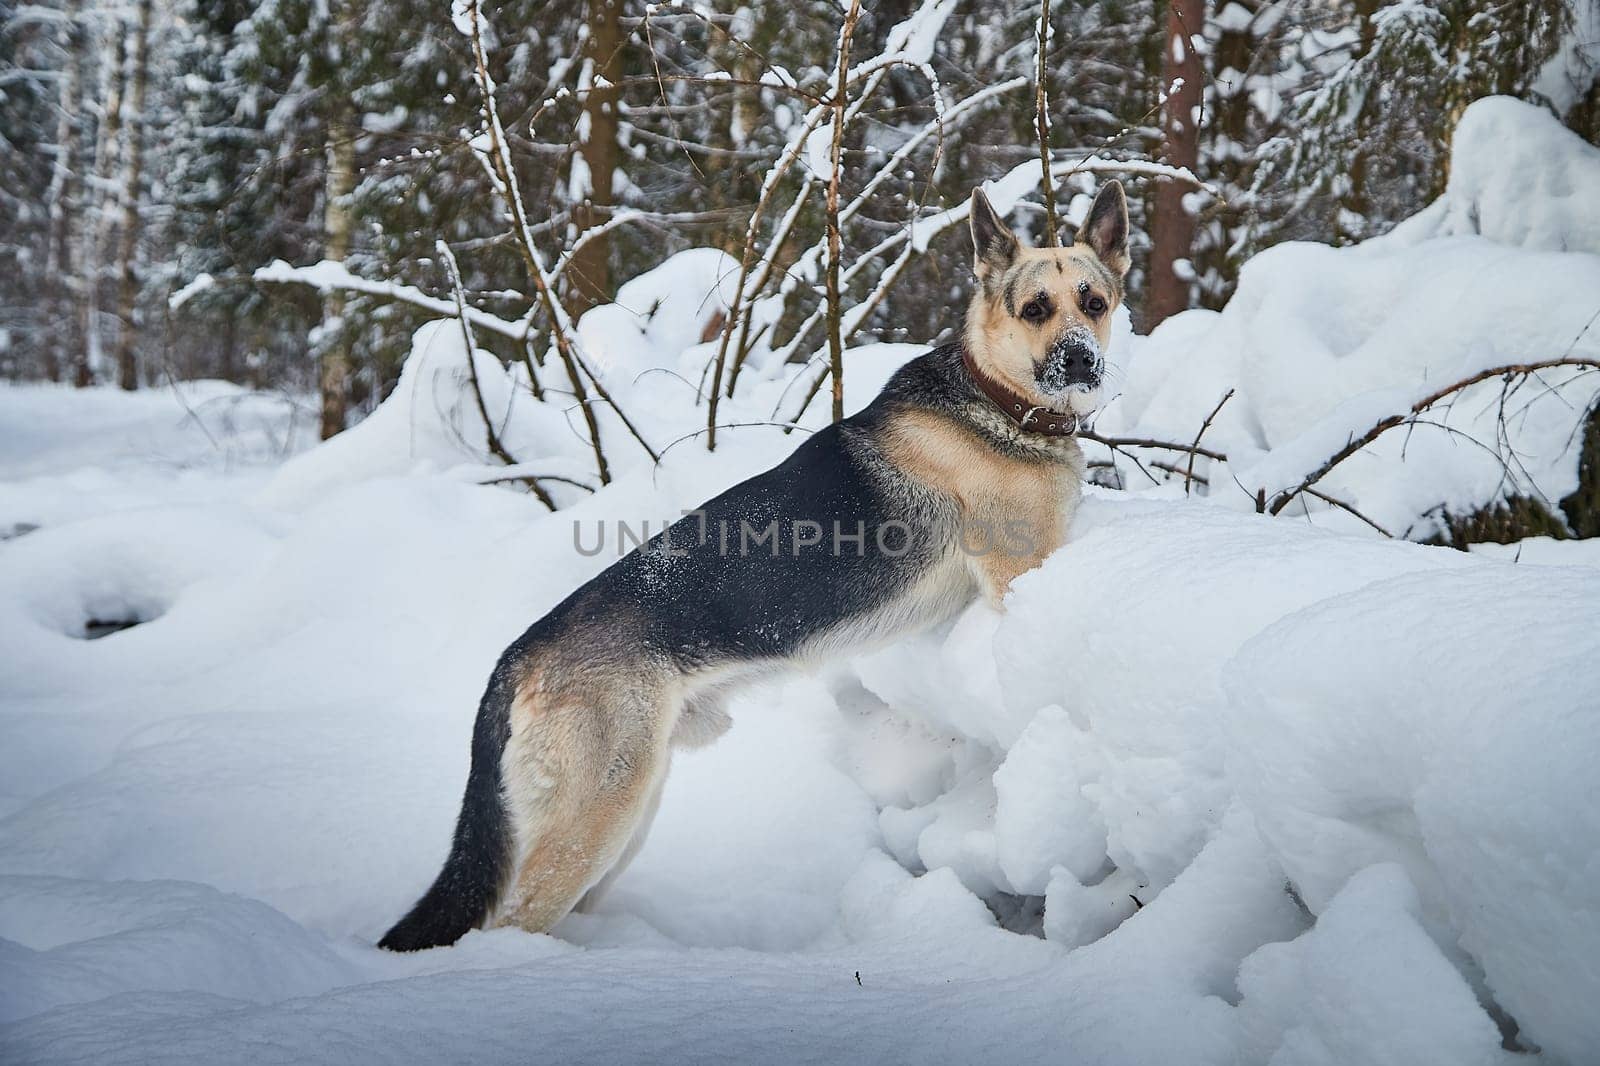 Dog German Shepherd outdoors in the forest in a winter day. Russian guard dog Eastern European Shepherd in nature on snow and white trees covered snow